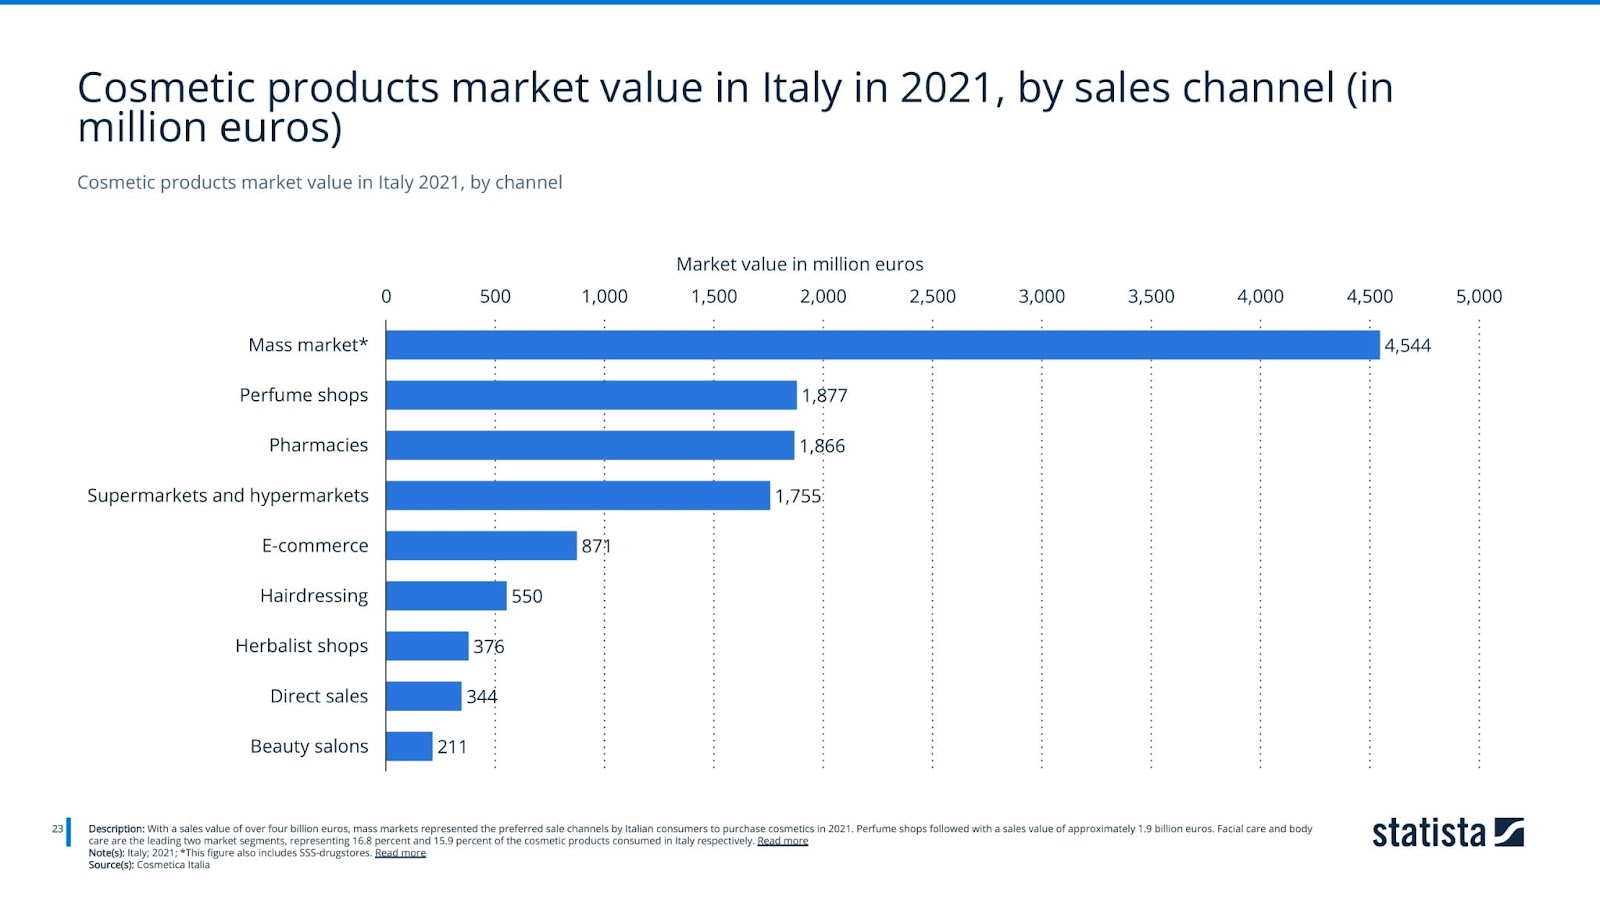 Cosmetic products market value in Italy 2021, by channel